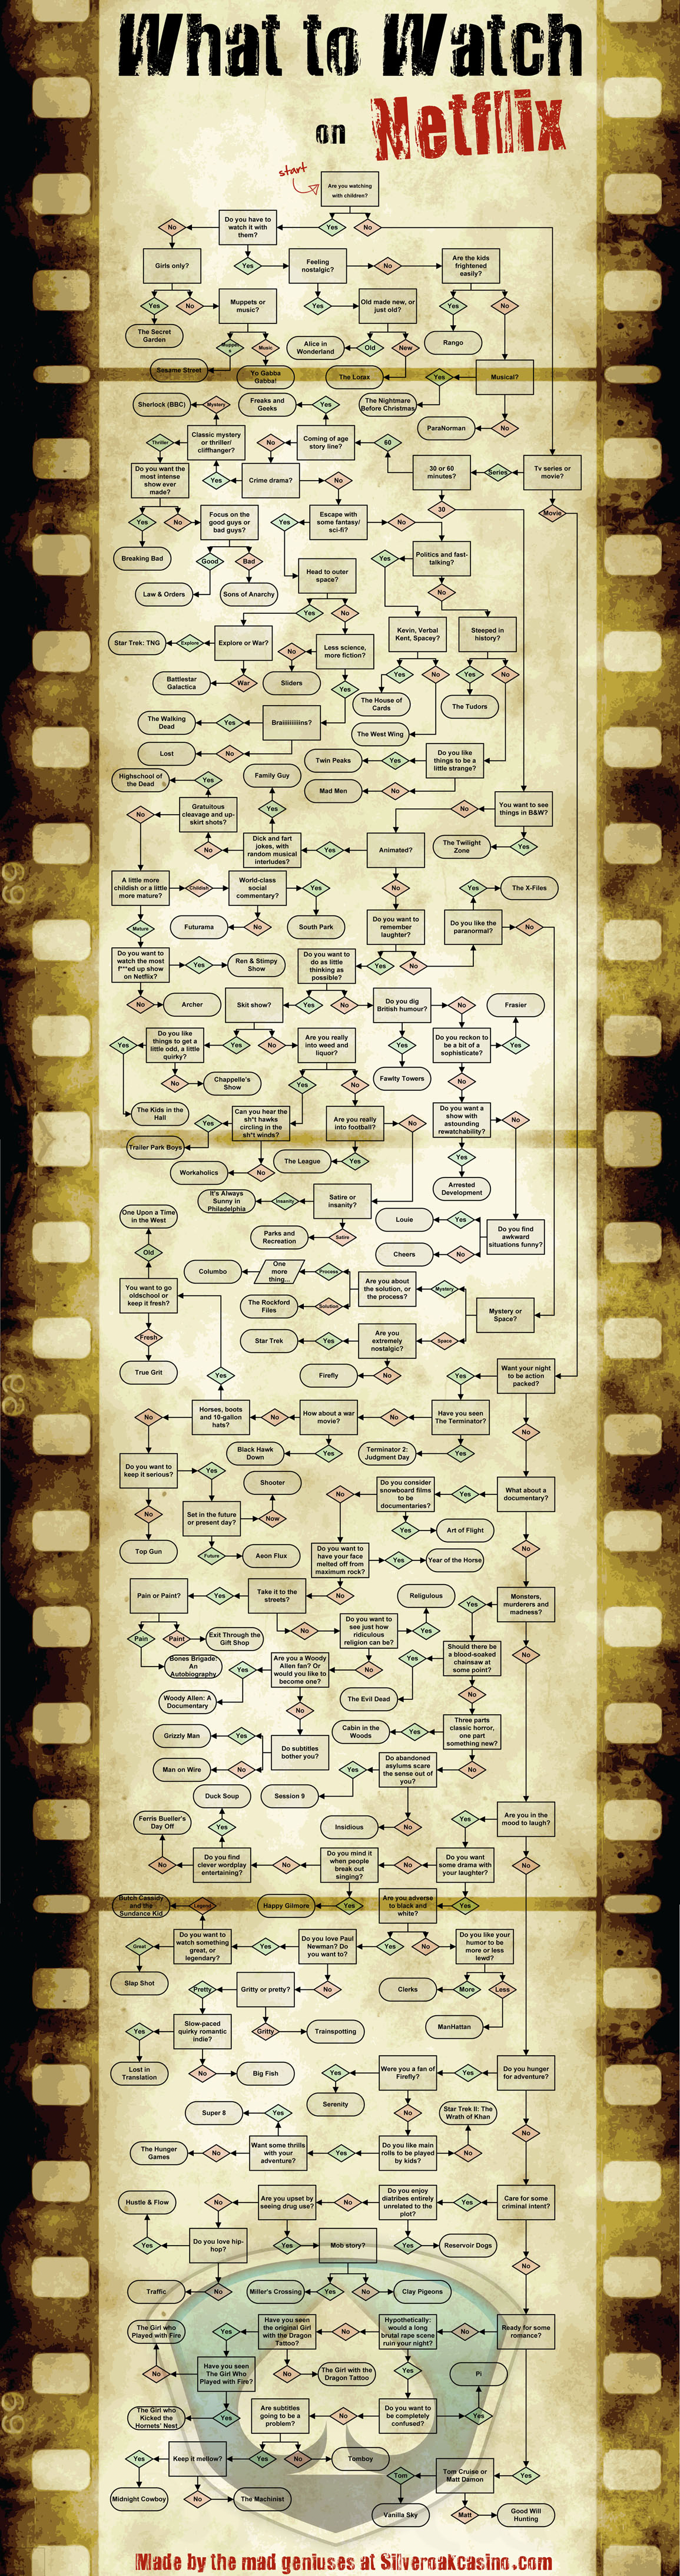 Extreme Guide: What To Watch On Netflix [Flowchart]